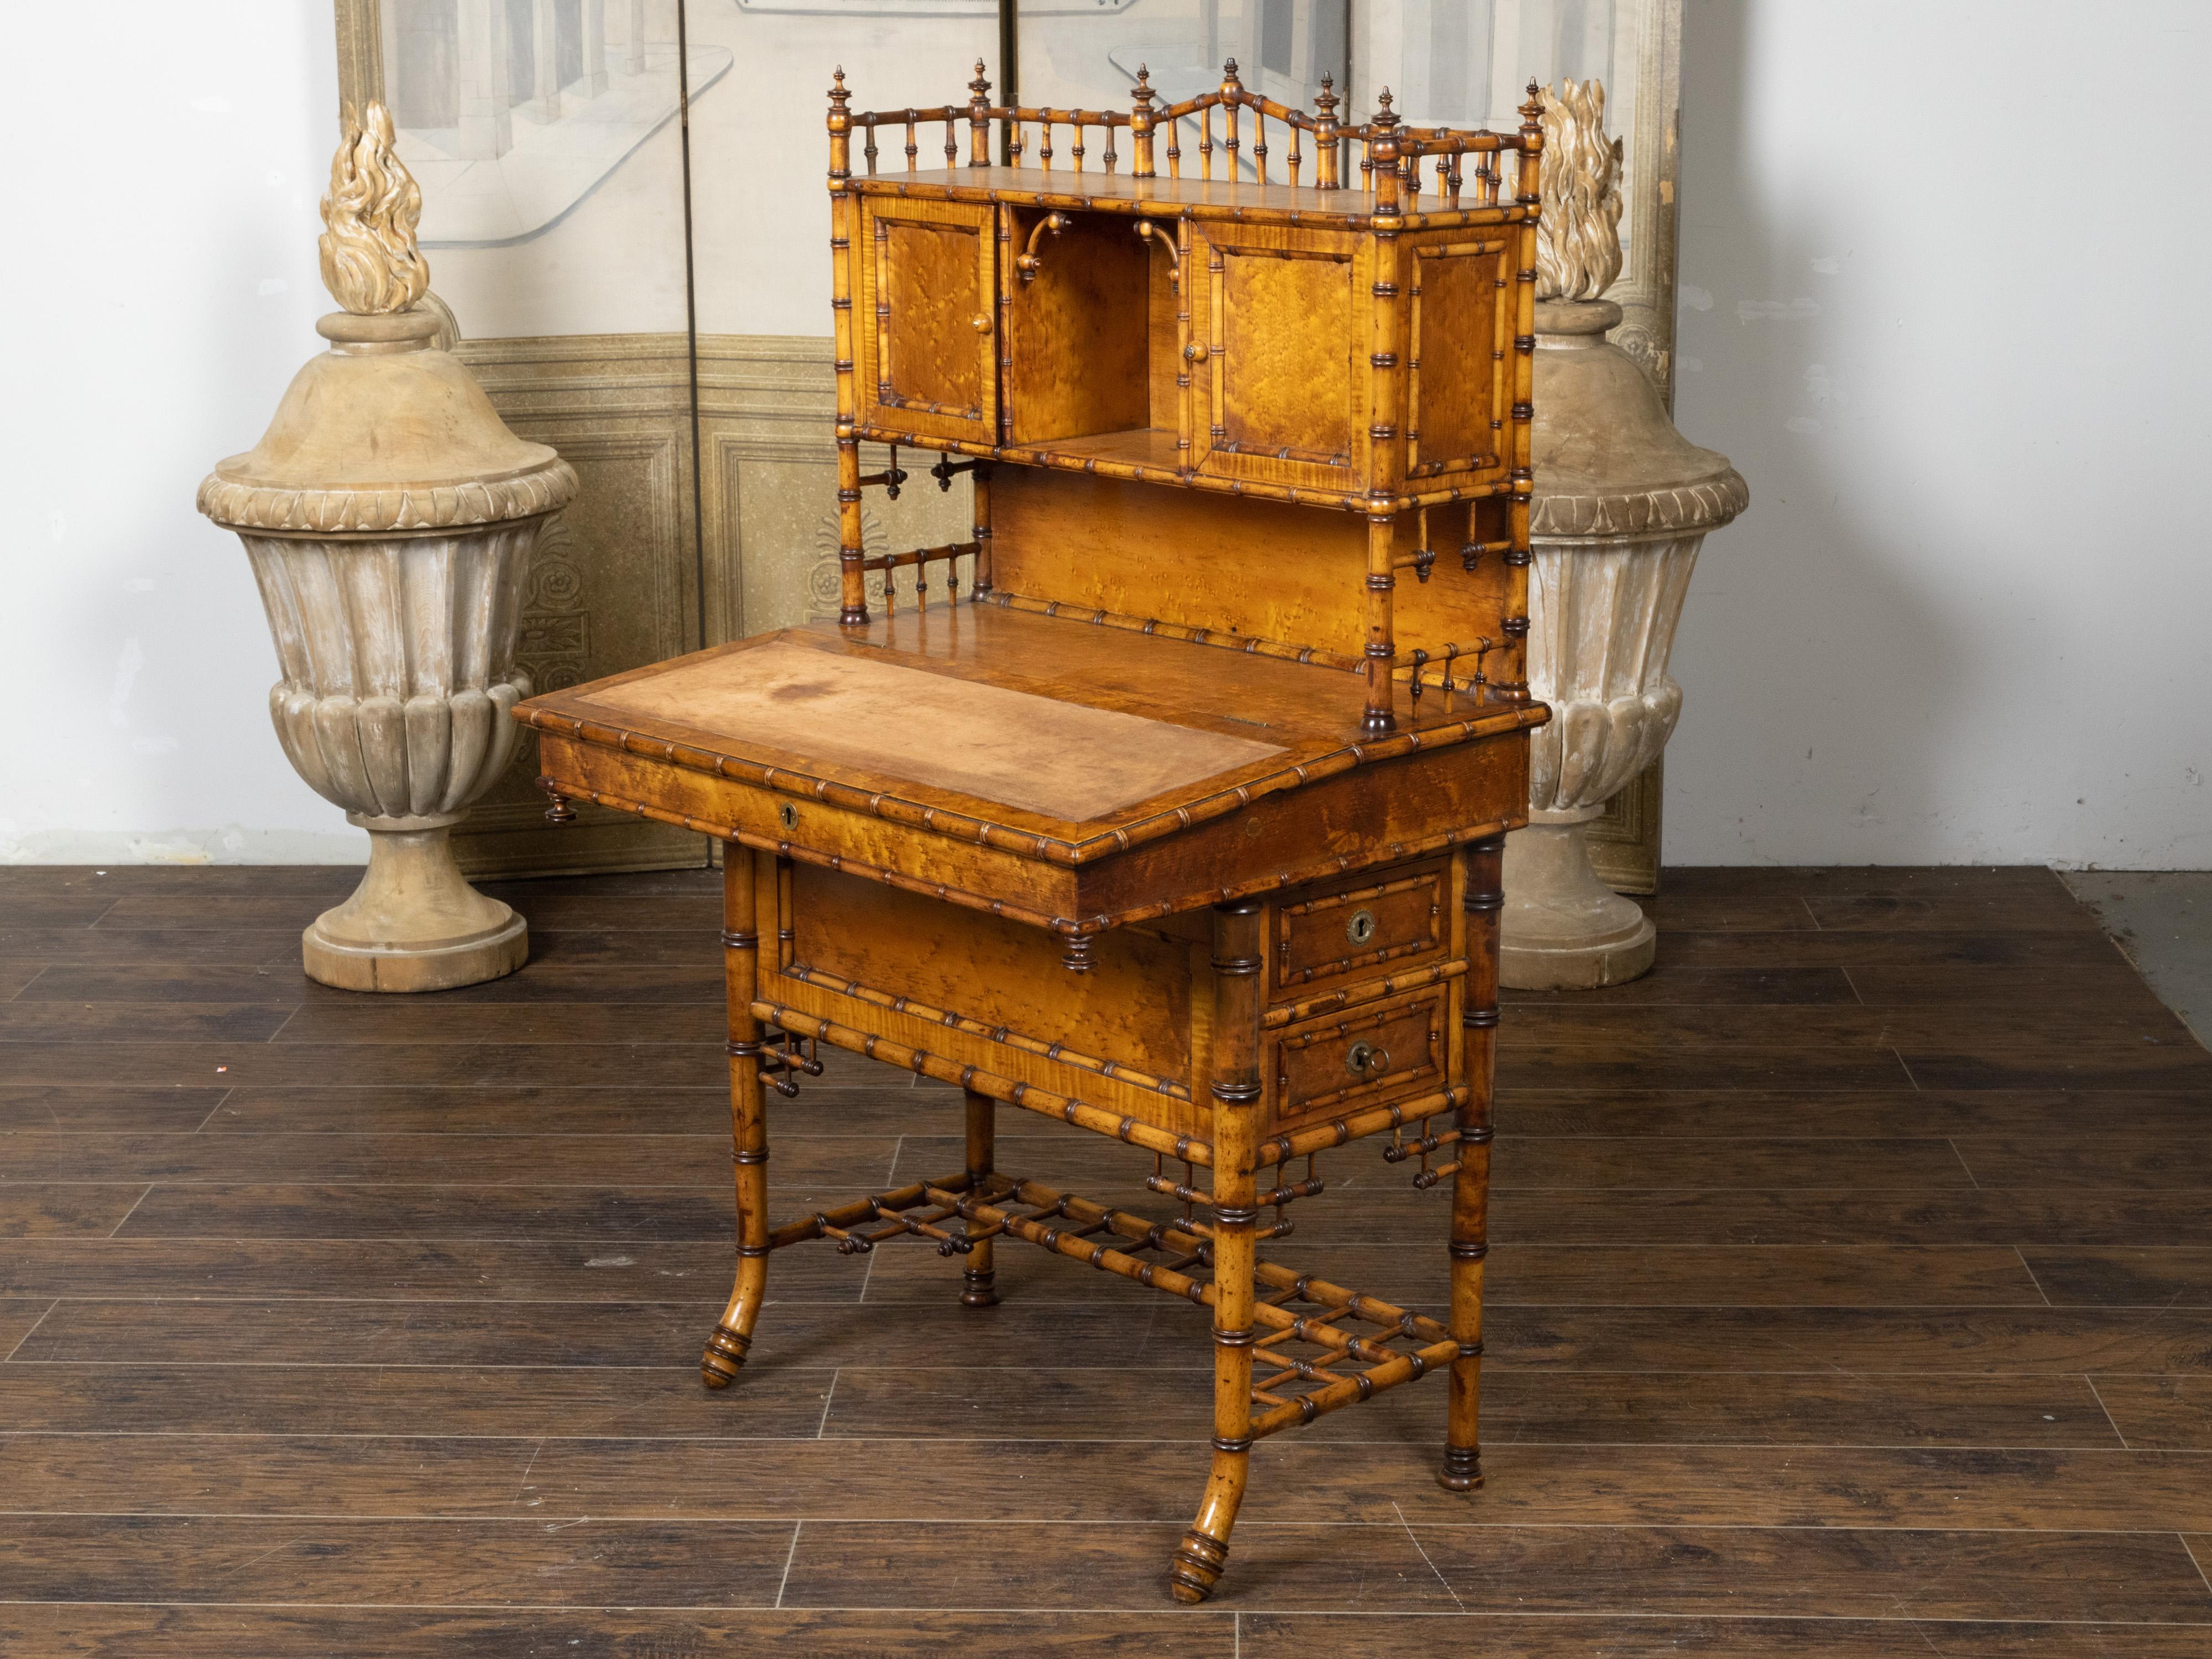 An English Chinese Chippendale style tall bamboo secretary from the 19th century, with slanted lift-top writing table, doors and drawers. Created in England during the 19th century, this bamboo secretary charms us with its slender proportions and